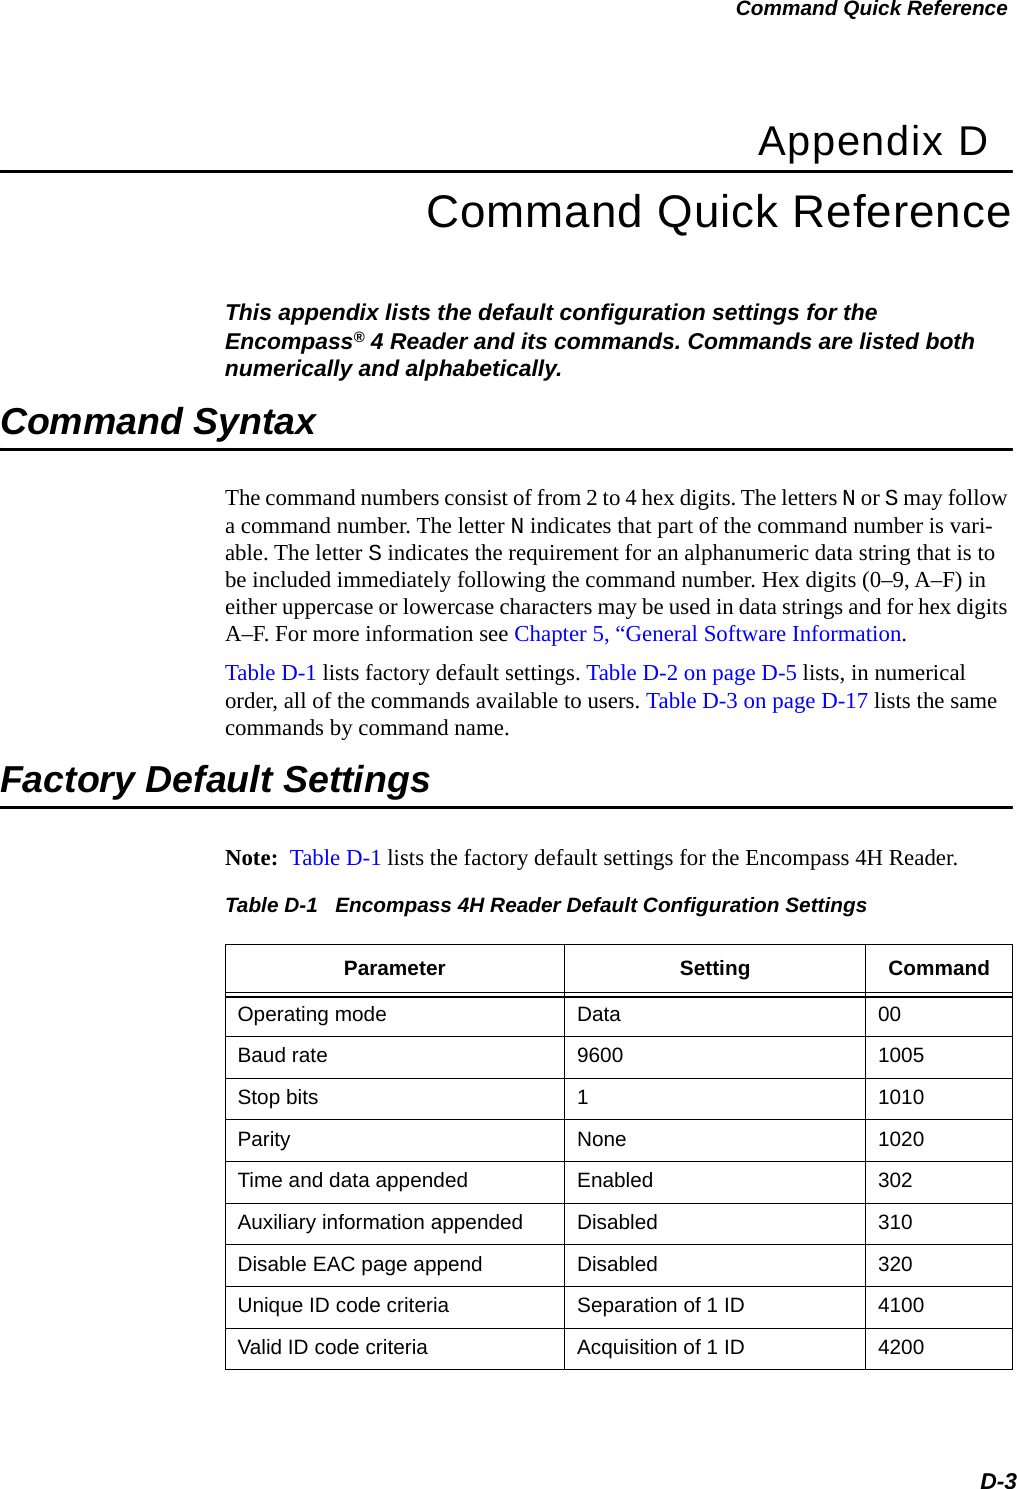 Command Quick ReferenceD-3Appendix DCommand Quick ReferenceThis appendix lists the default configuration settings for the Encompass® 4 Reader and its commands. Commands are listed both numerically and alphabetically.Command SyntaxThe command numbers consist of from 2 to 4 hex digits. The letters N or S may follow a command number. The letter N indicates that part of the command number is vari-able. The letter S indicates the requirement for an alphanumeric data string that is to be included immediately following the command number. Hex digits (0–9, A–F) in either uppercase or lowercase characters may be used in data strings and for hex digits A–F. For more information see Chapter 5, “General Software Information.Table D-1 lists factory default settings. Table D-2 on page D-5 lists, in numerical order, all of the commands available to users. Table D-3 on page D-17 lists the same commands by command name.Factory Default SettingsNote:  Table D-1 lists the factory default settings for the Encompass 4H Reader.Table D-1   Encompass 4H Reader Default Configuration Settings Parameter Setting CommandOperating mode Data 00Baud rate 9600 1005Stop bits 11010Parity None 1020Time and data appended Enabled 302Auxiliary information appended Disabled 310Disable EAC page append Disabled 320Unique ID code criteria Separation of 1 ID 4100Valid ID code criteria Acquisition of 1 ID 4200